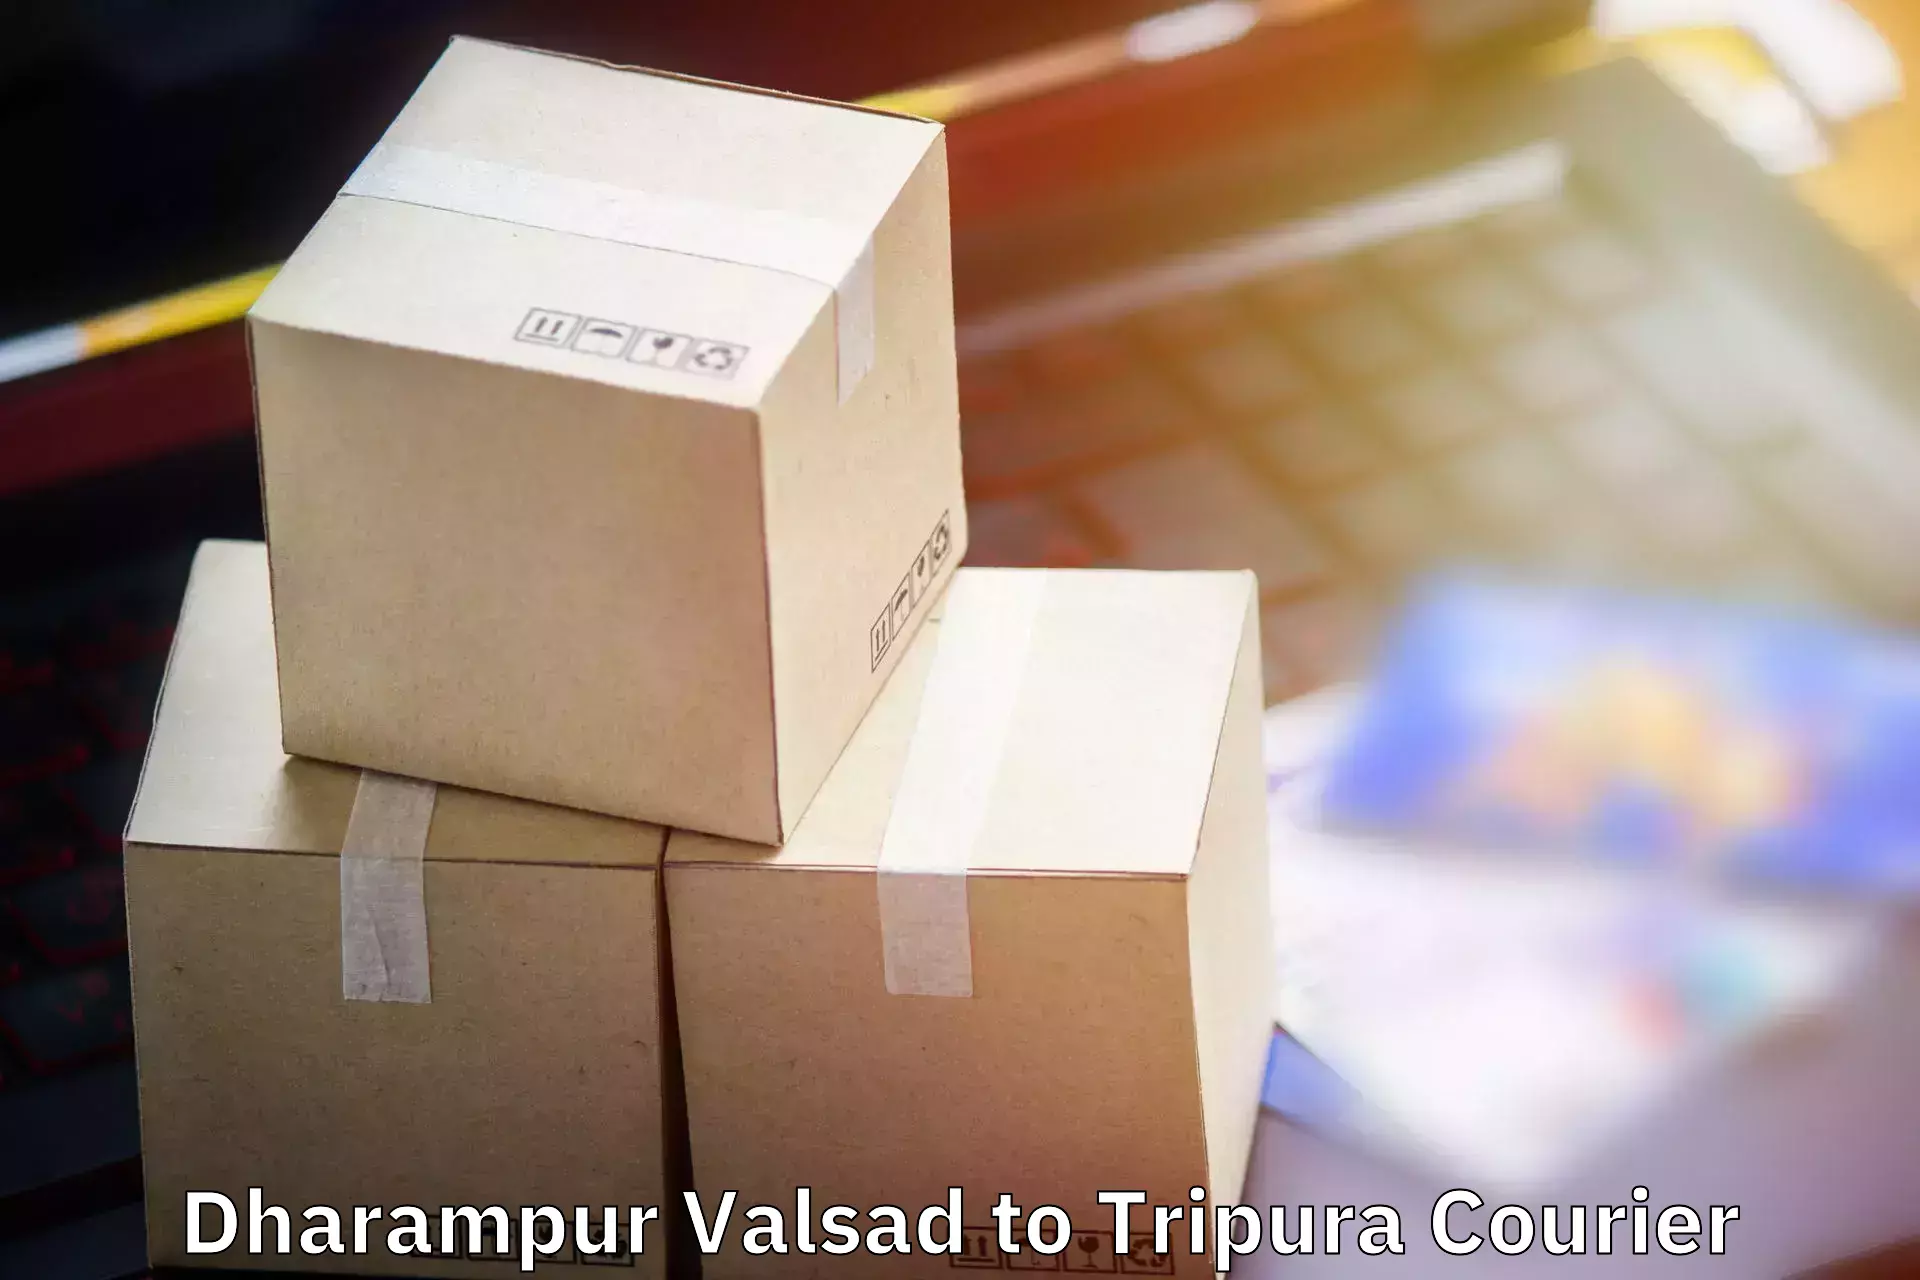 Reliable luggage courier Dharampur Valsad to Manu Bazar